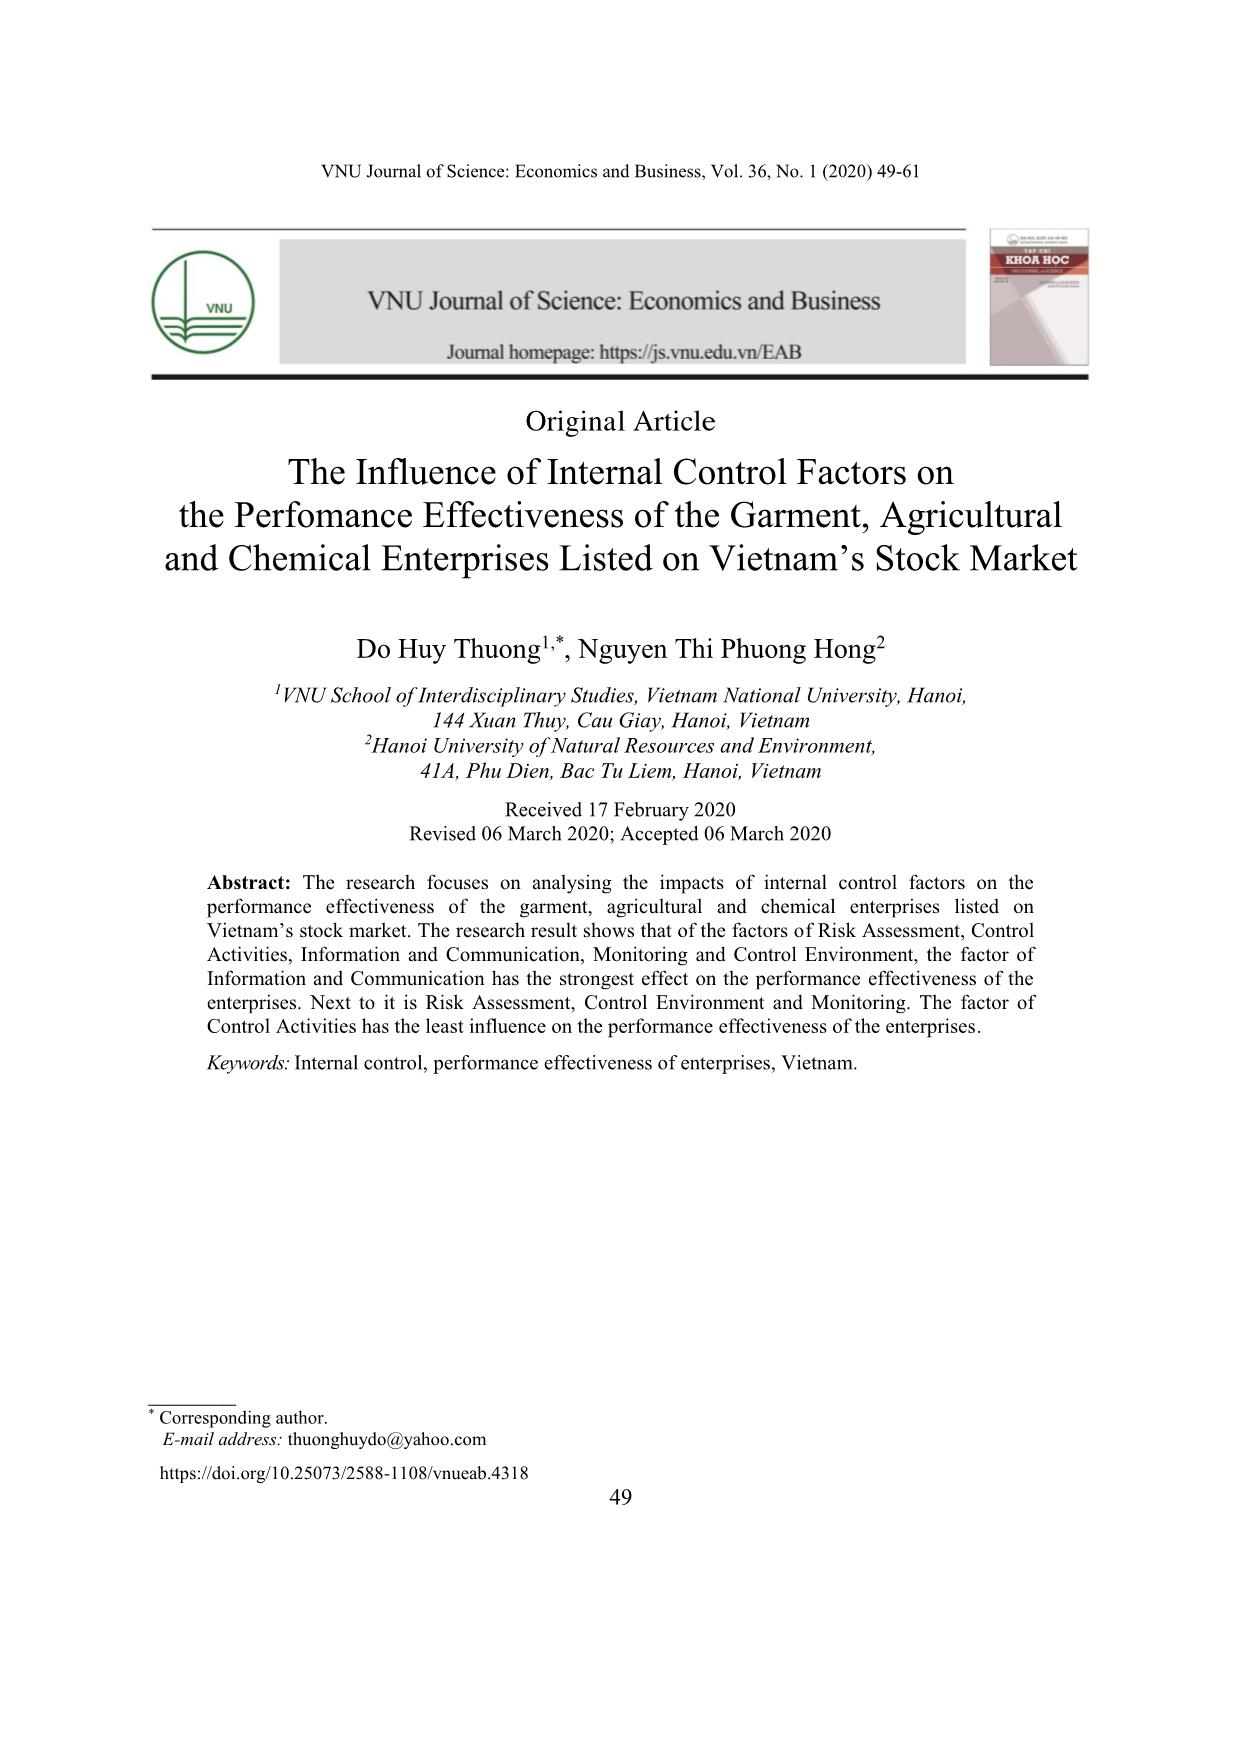 The influence of internal control factors on the perfomance effectiveness of the garment, agricultural and chemical enterprises listed on Vietnam’s stock market trang 1